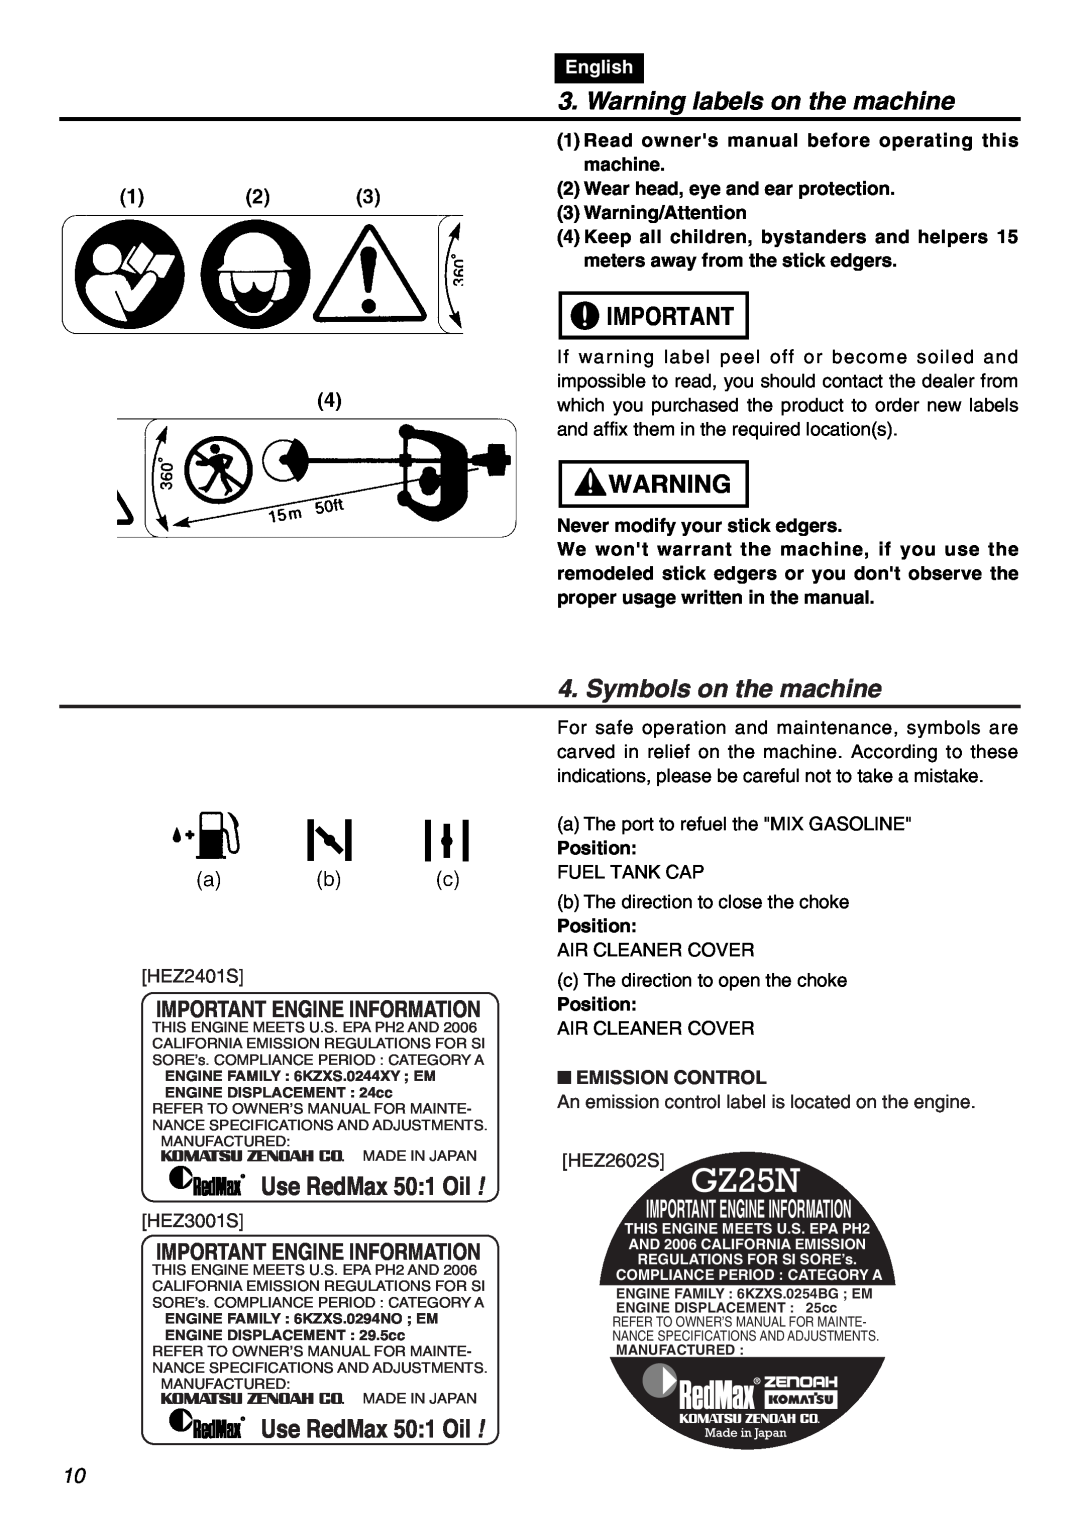 RedMax HEZ2602S, HEZ3001S Warning labels on the machine, Symbols on the machine, Important Engine Information, English 